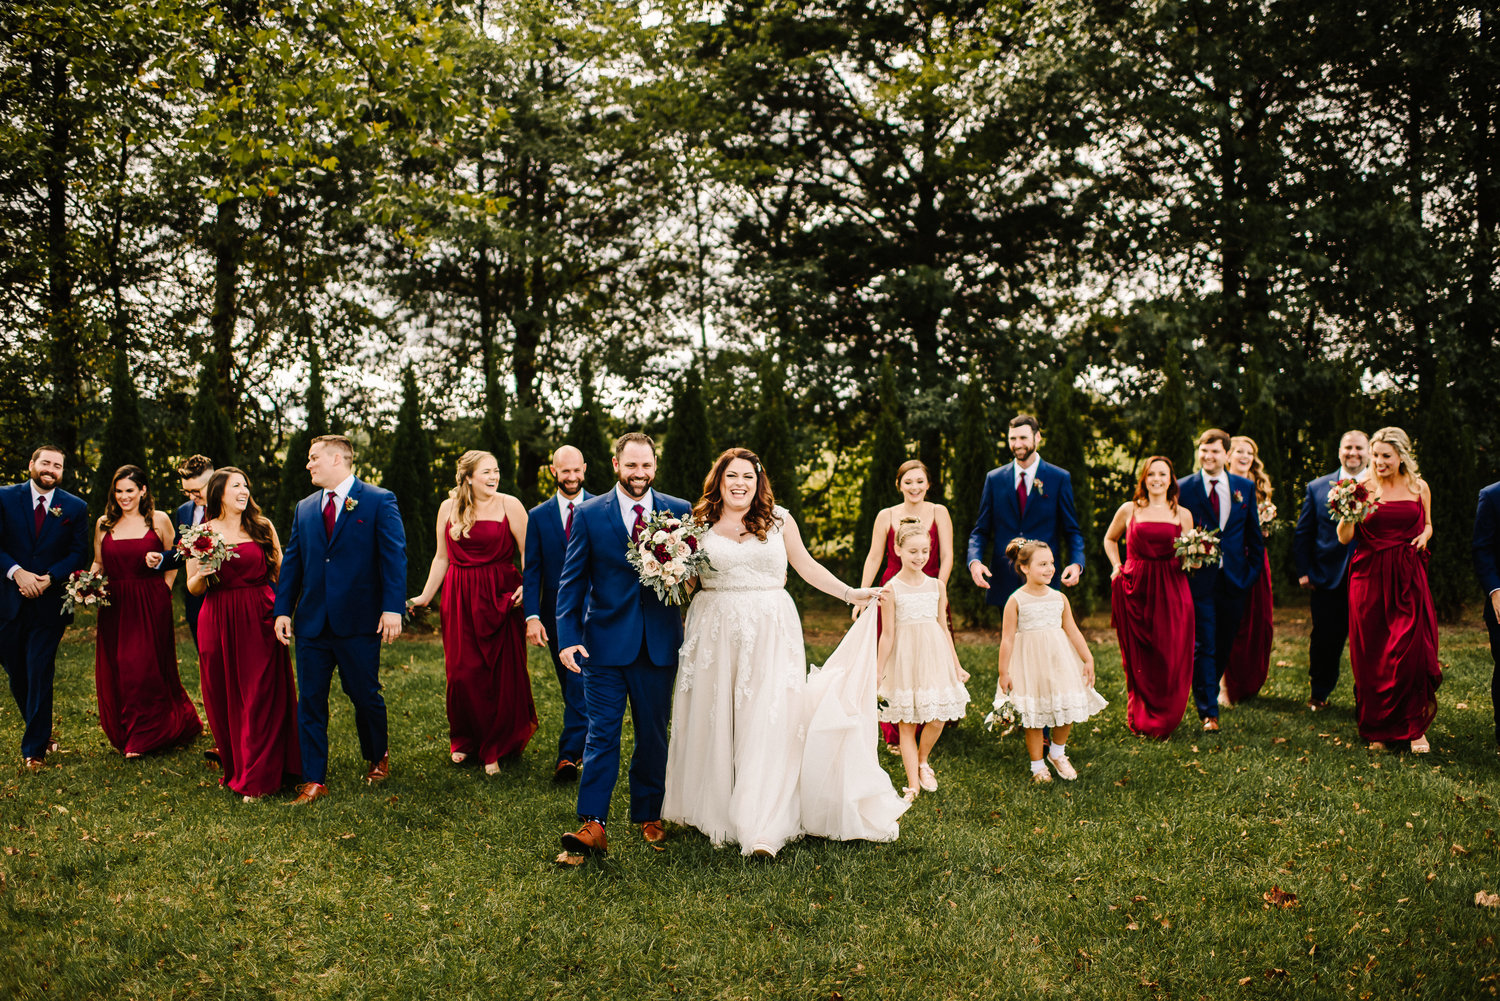 Vibrant September Wedding at the Barn at Sycamore Farms in Arrington ...